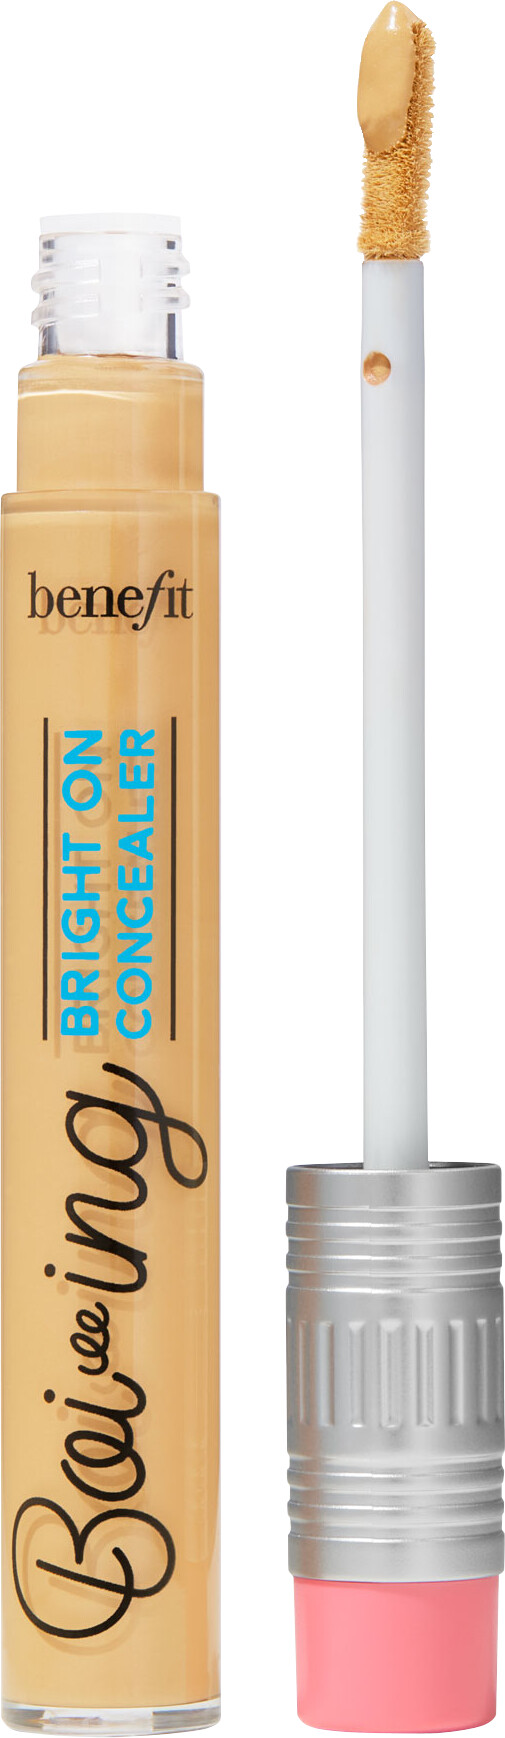 Benefit Boi-ing Bright On Concealer 5ml Cantaloupe